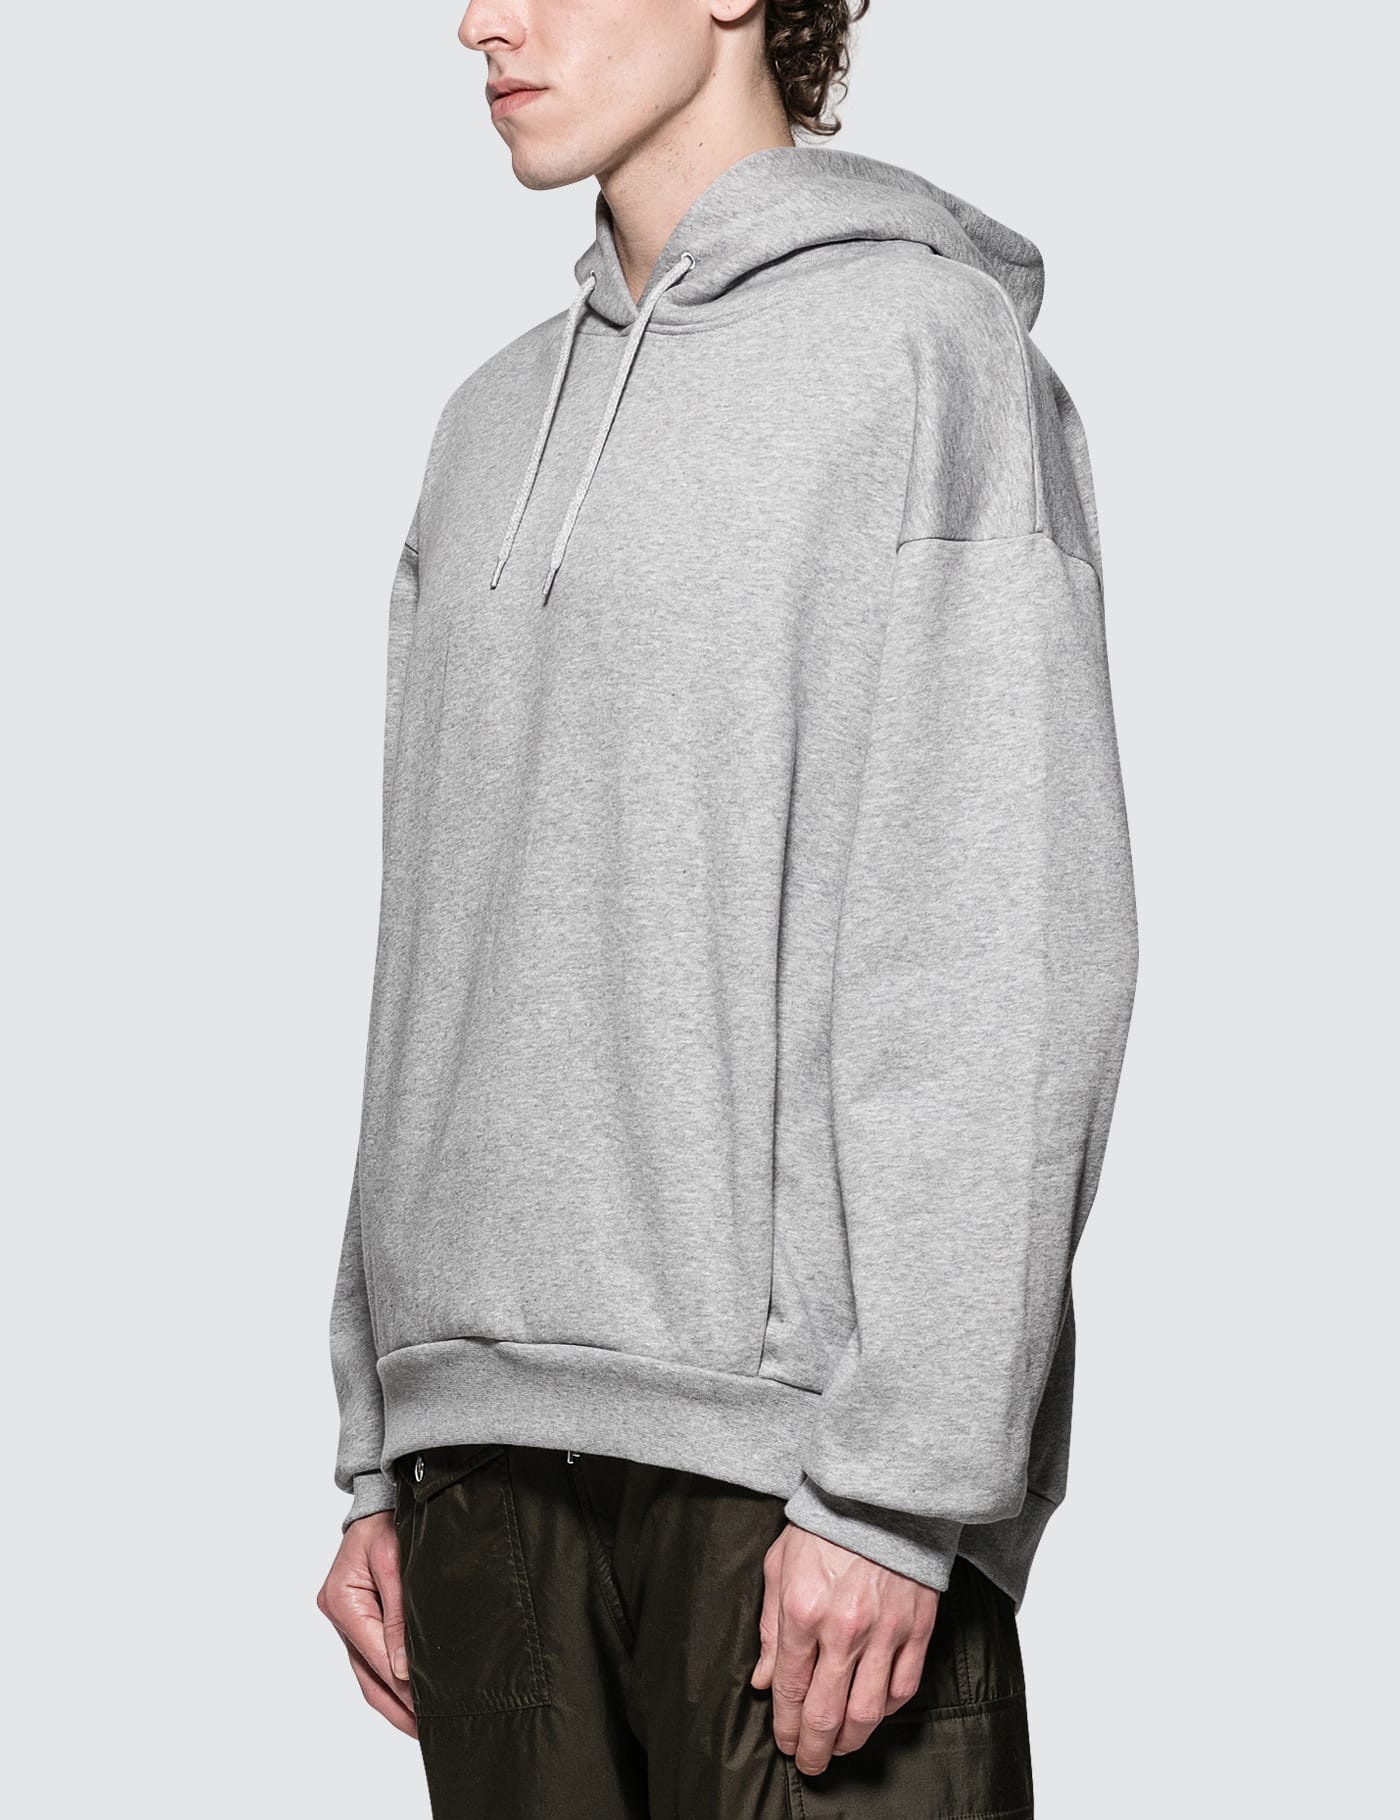 Martine Rose - Classic Hoodie | HBX - Globally Curated Fashion and 